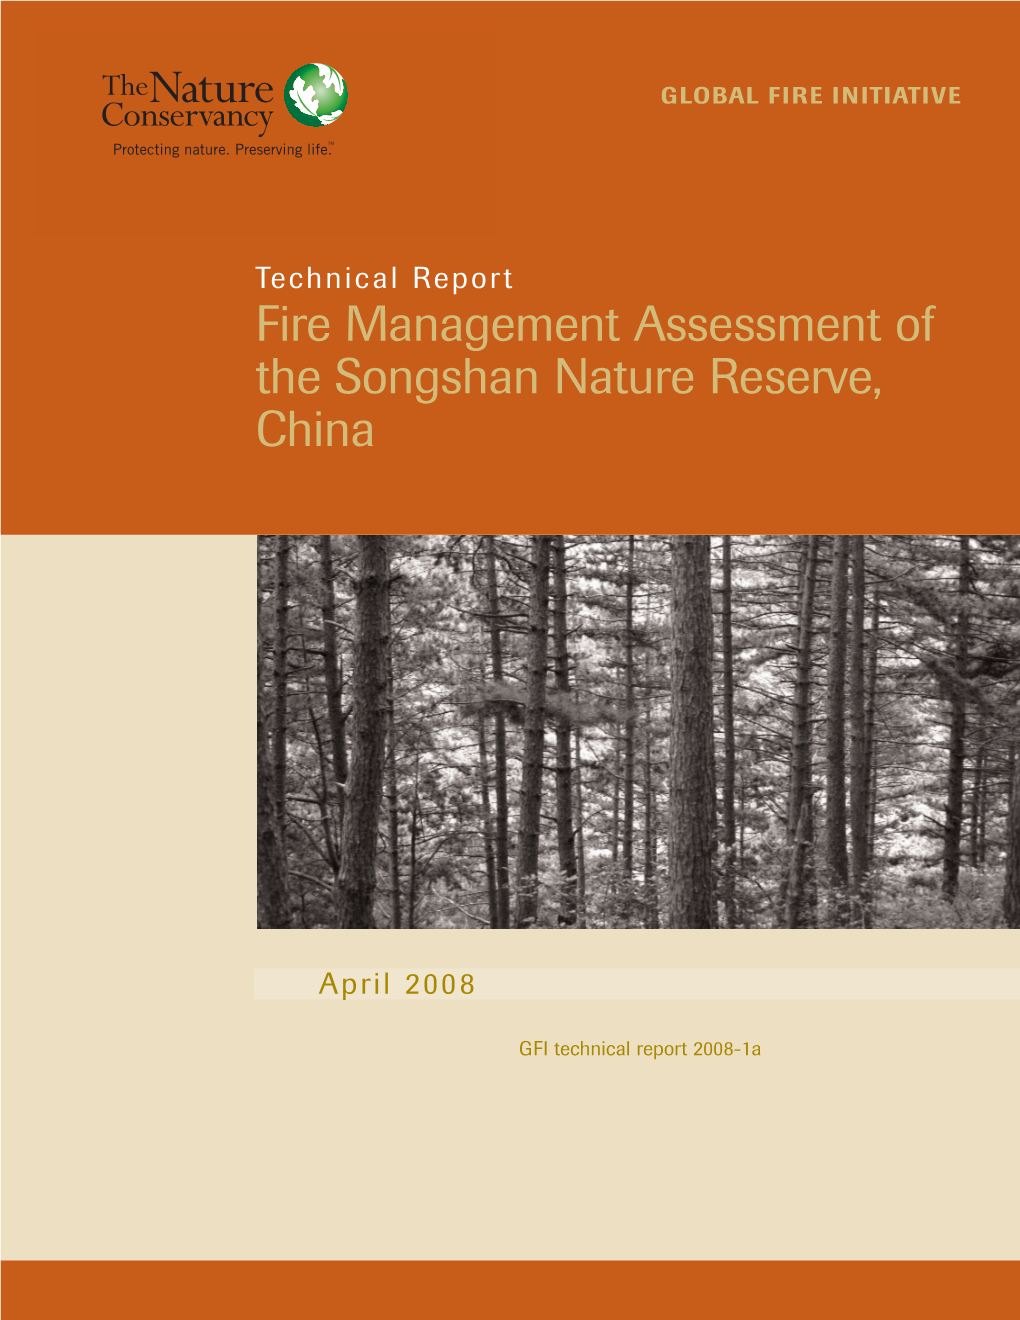 Fire Management Assessment of the Songshan Nature Reserve, China